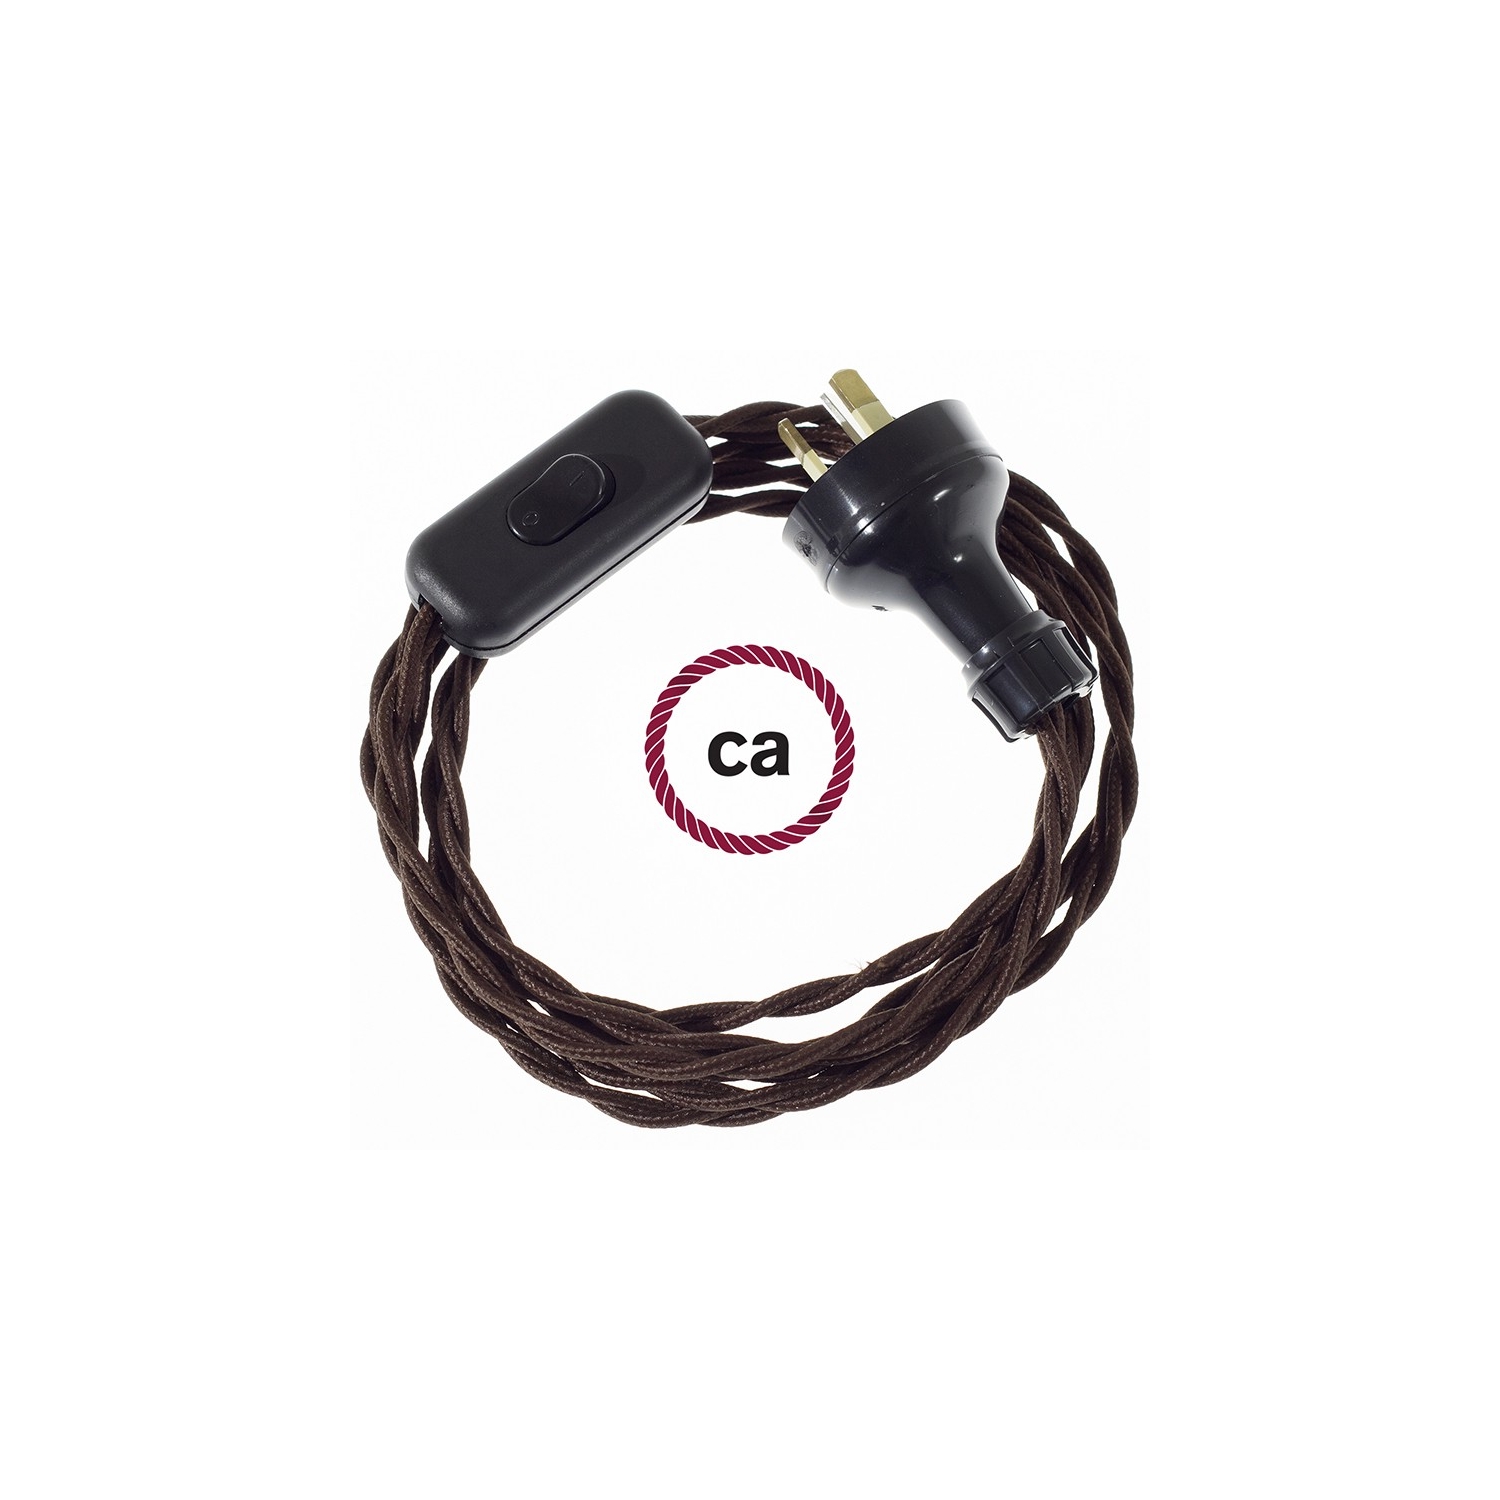 Wiring Brown Rayon textile cable TM13 - 1.80 mt